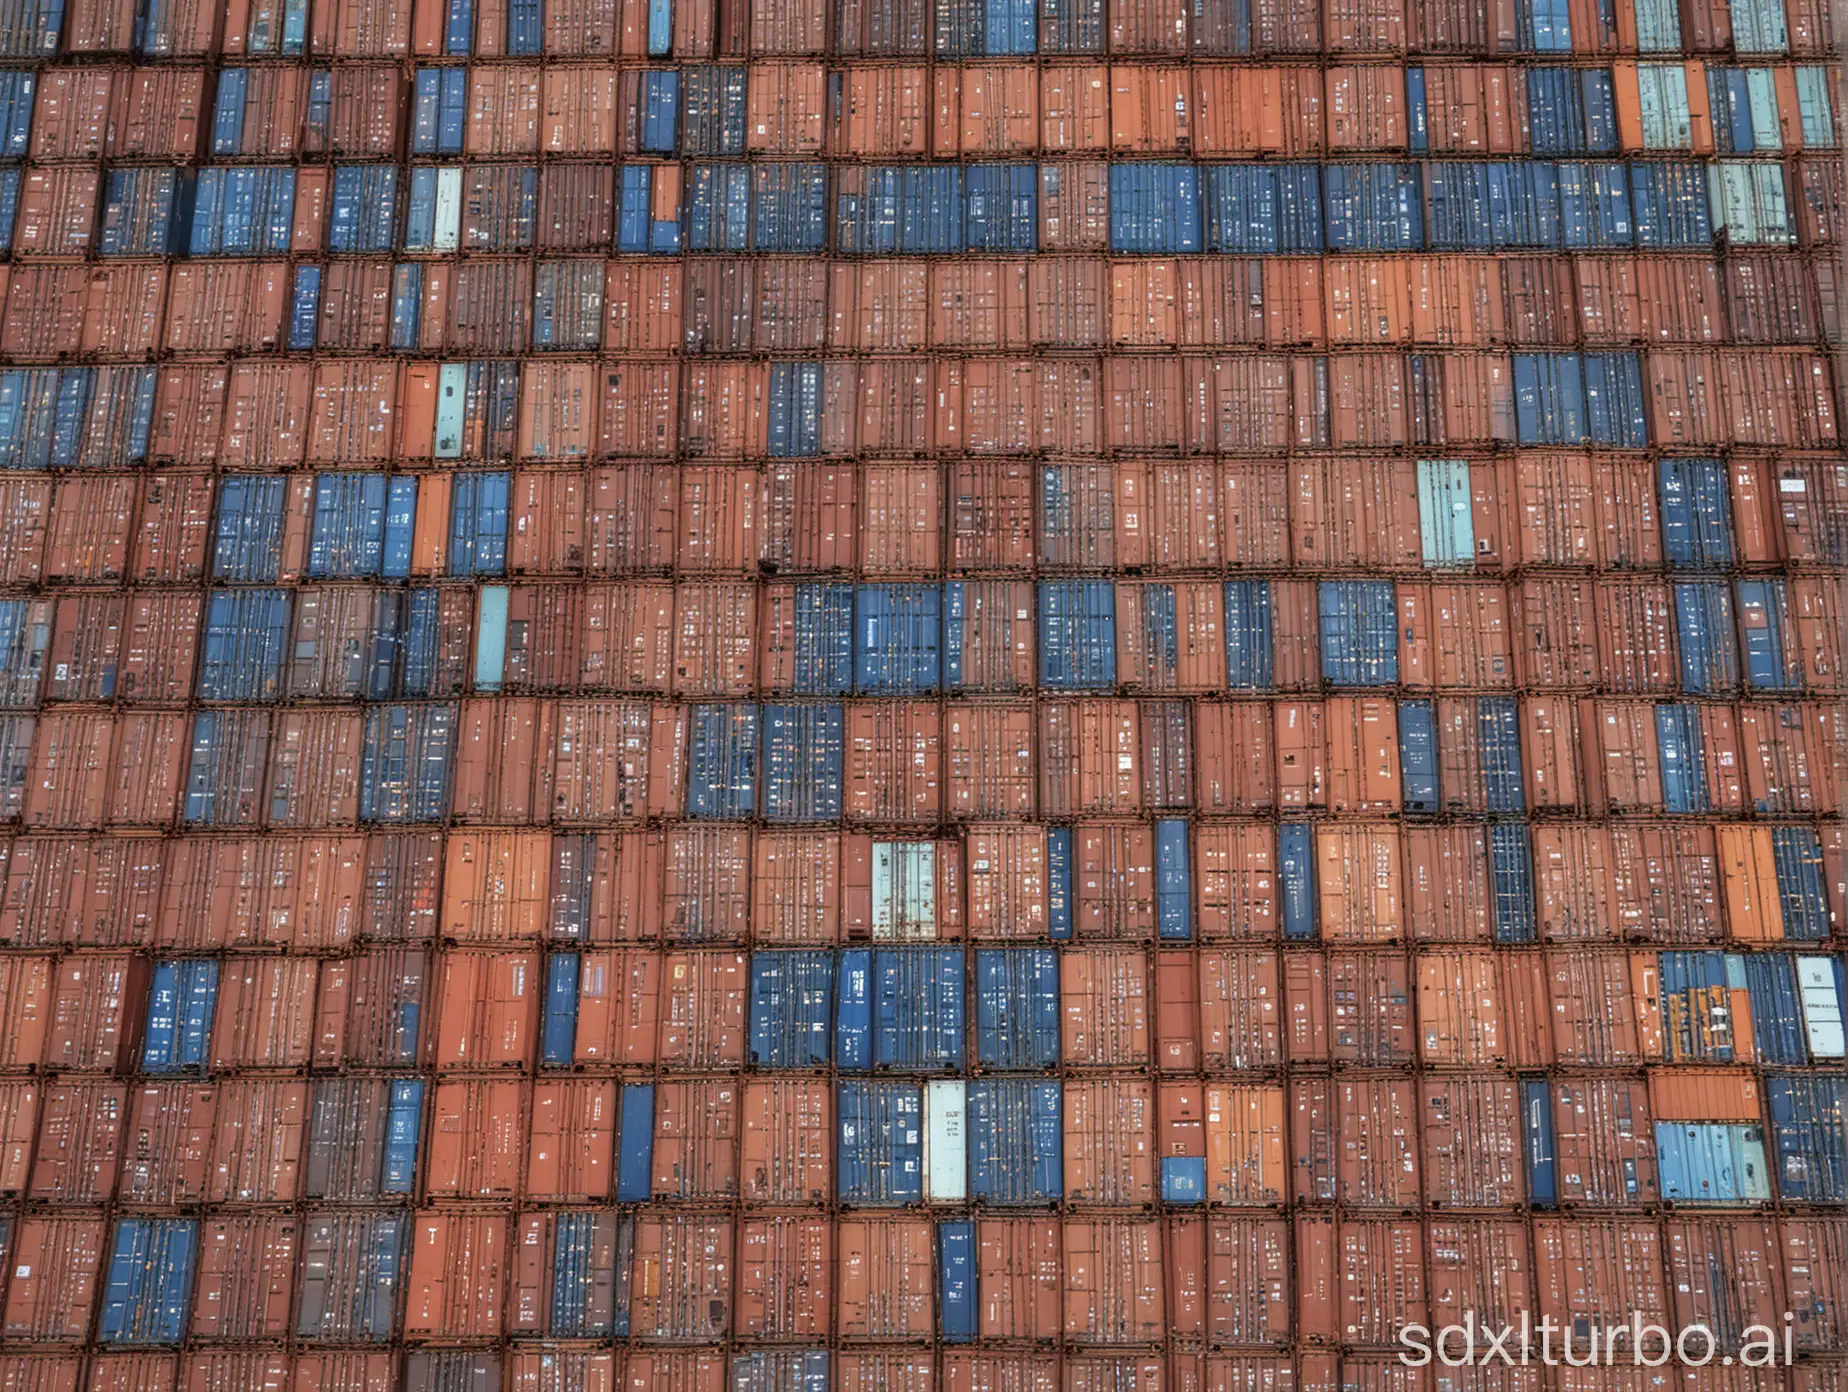 Exporting-Goods-in-Shipping-Containers